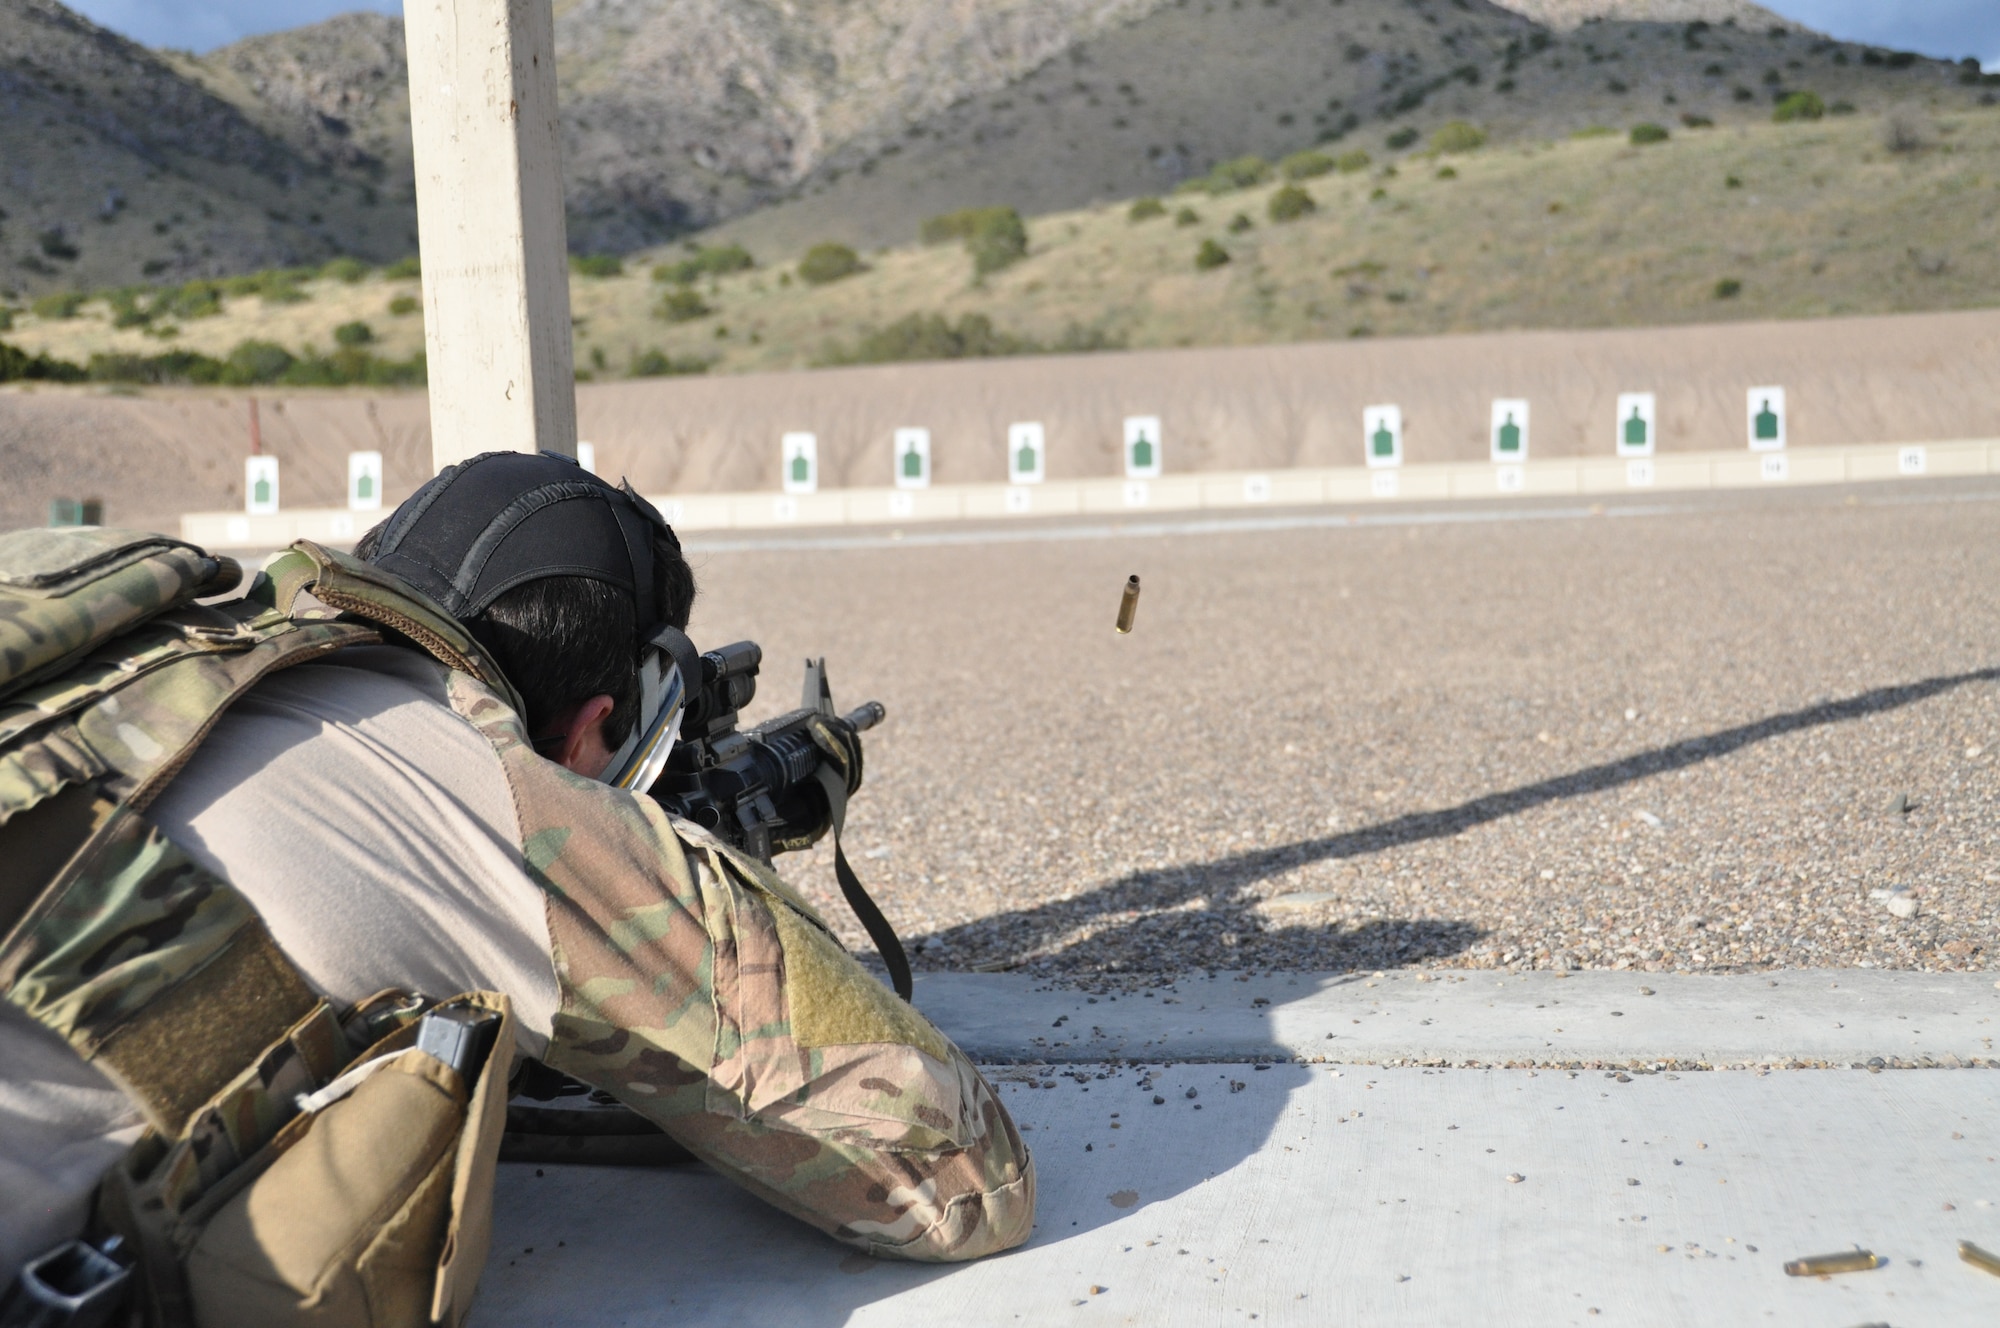 A pararescuman fires his rifle downrange as part of a shooting drill during the 2014 Guardian Angel Rodeo, Kirtland Air Force Base, New Mexico, September 24, 2014. The rodeo, or competition, was a week-long event that tested the PJs on land navigation skills, high-angel rope rescues, survival techniques, medical skills, weapons operations and overall physical endurance. (U.S. Air Force photo/ Tech. Sgt. Katie Spencer)  